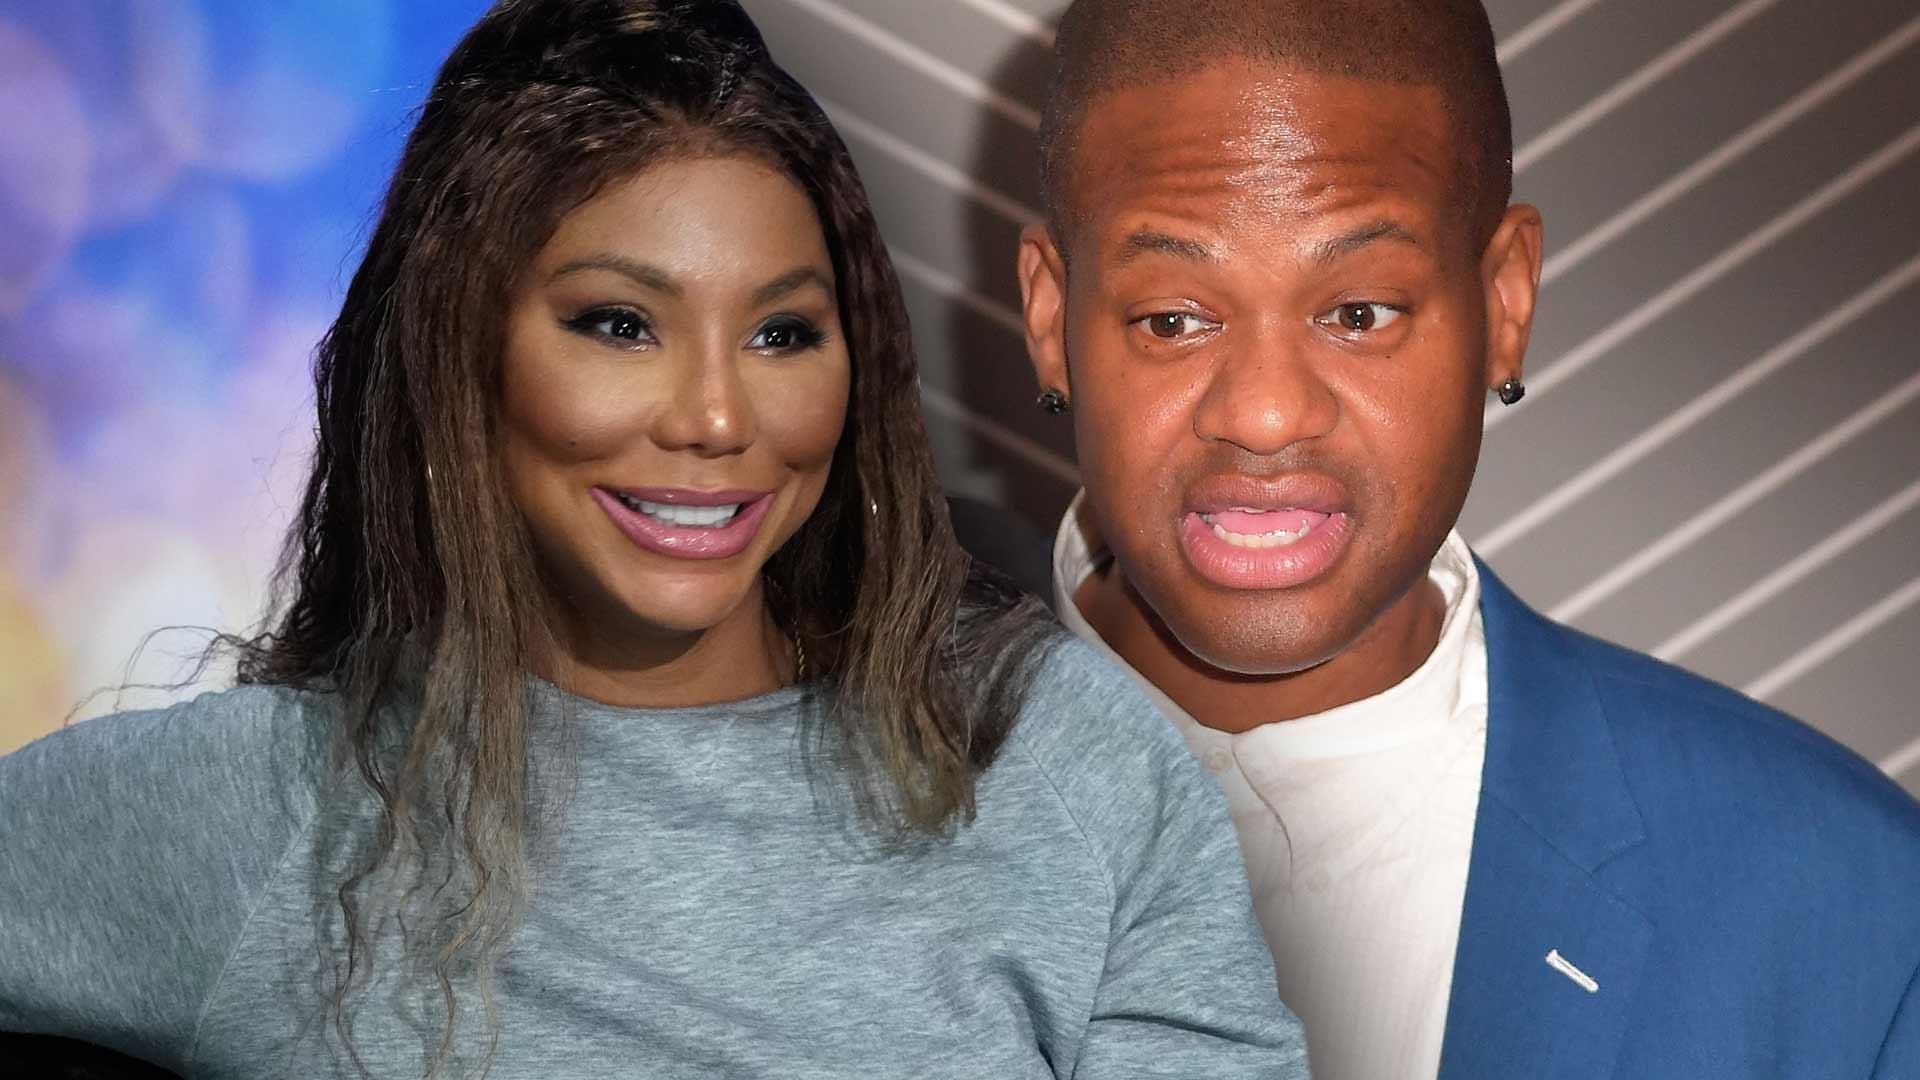 Tamar Braxton’s Estranged Husband Vince Herbert Evicted From Luxury Rental Home Over Unpaid Rent